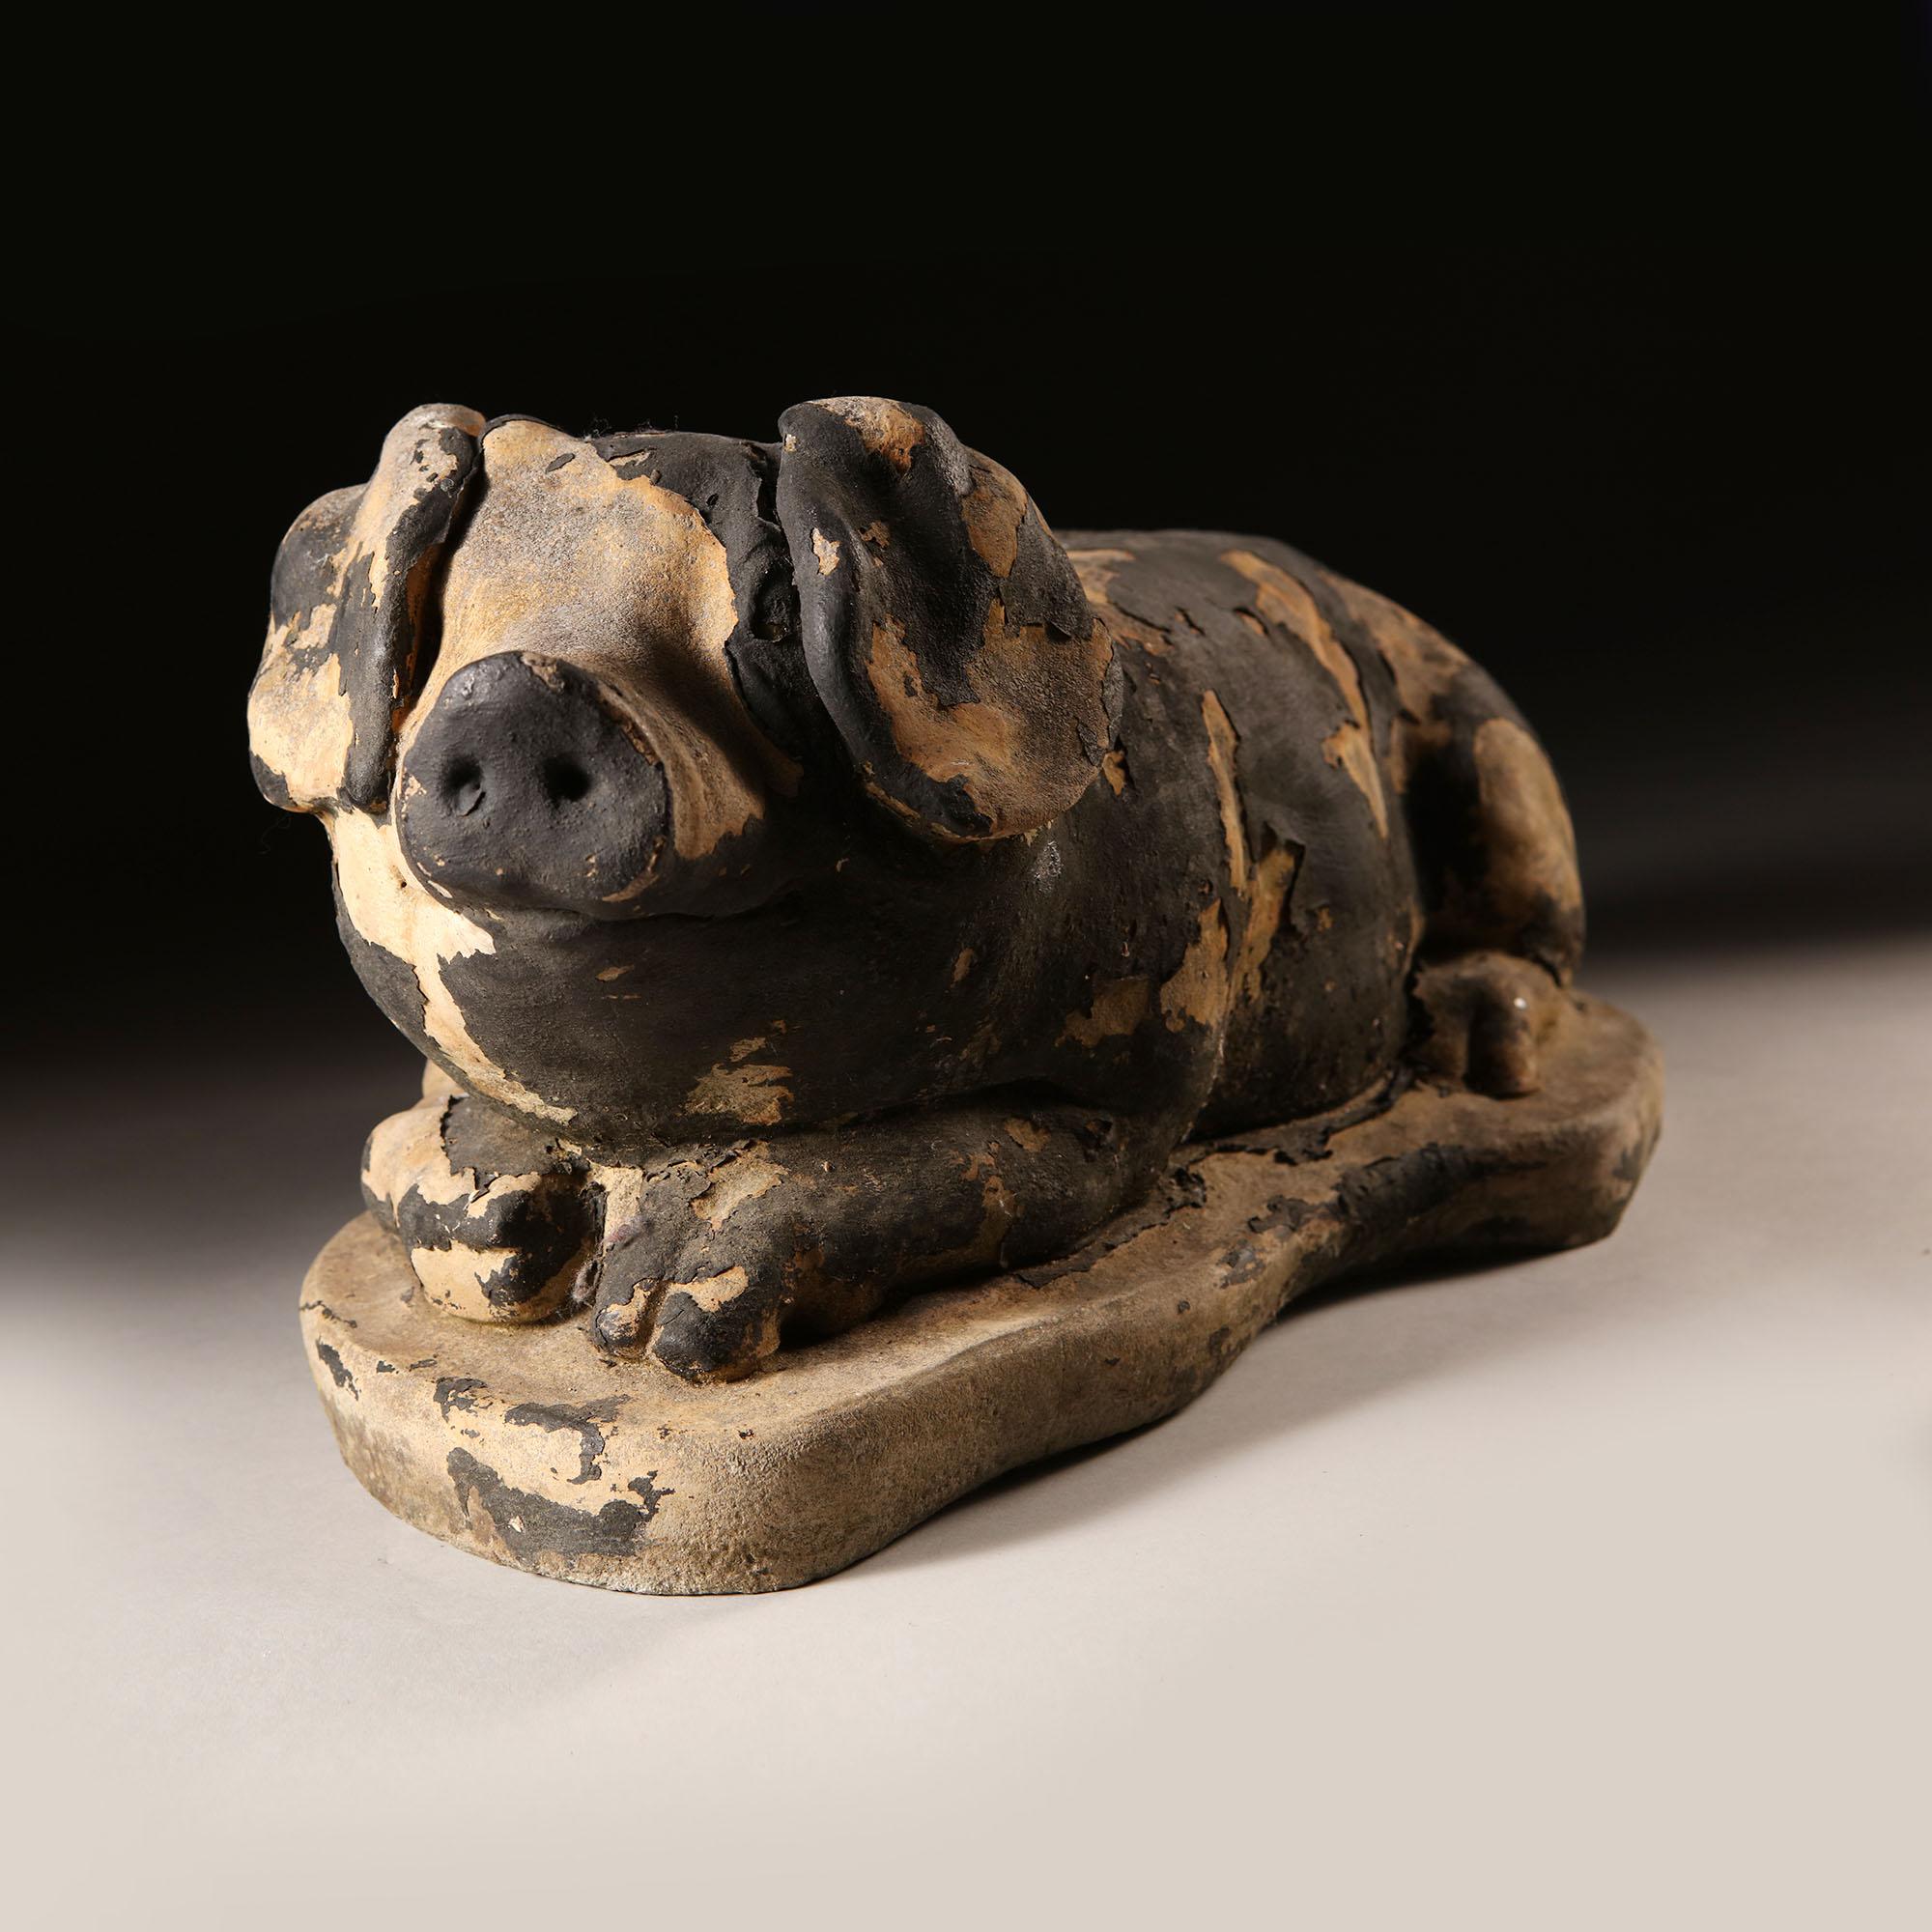 A late 19th century English animal sculpture, a stone model of a smiling pig lying down, with large ears, with remaining black paint residue.